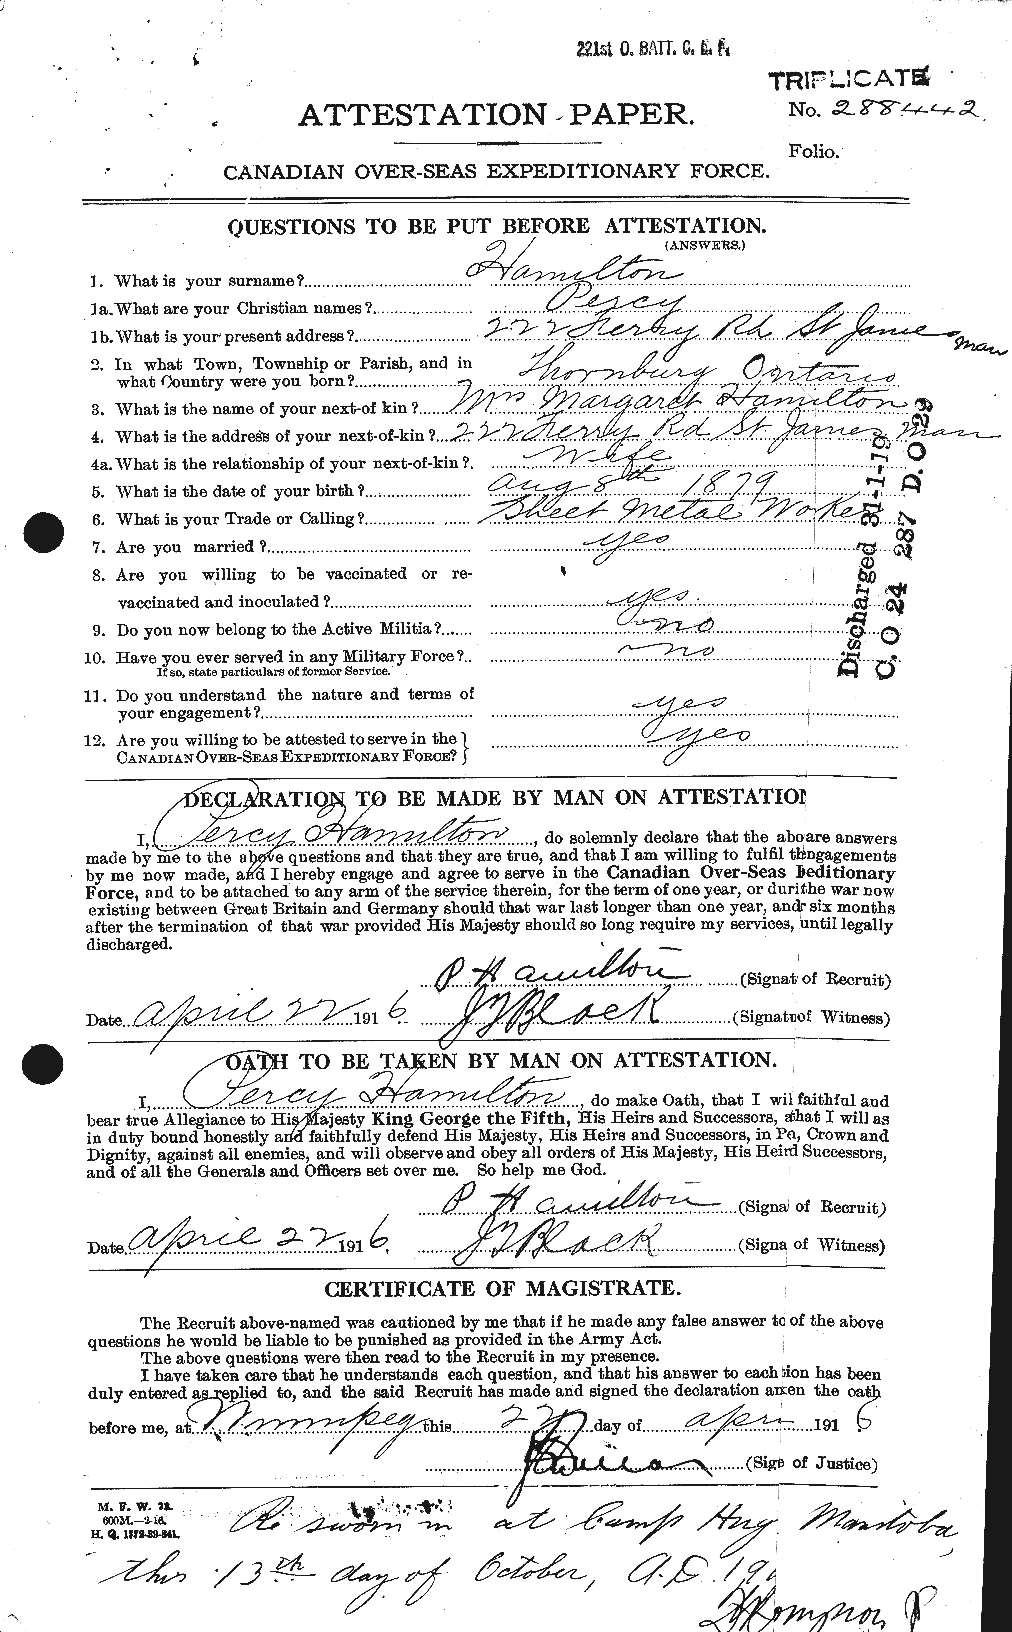 Personnel Records of the First World War - CEF 373199a